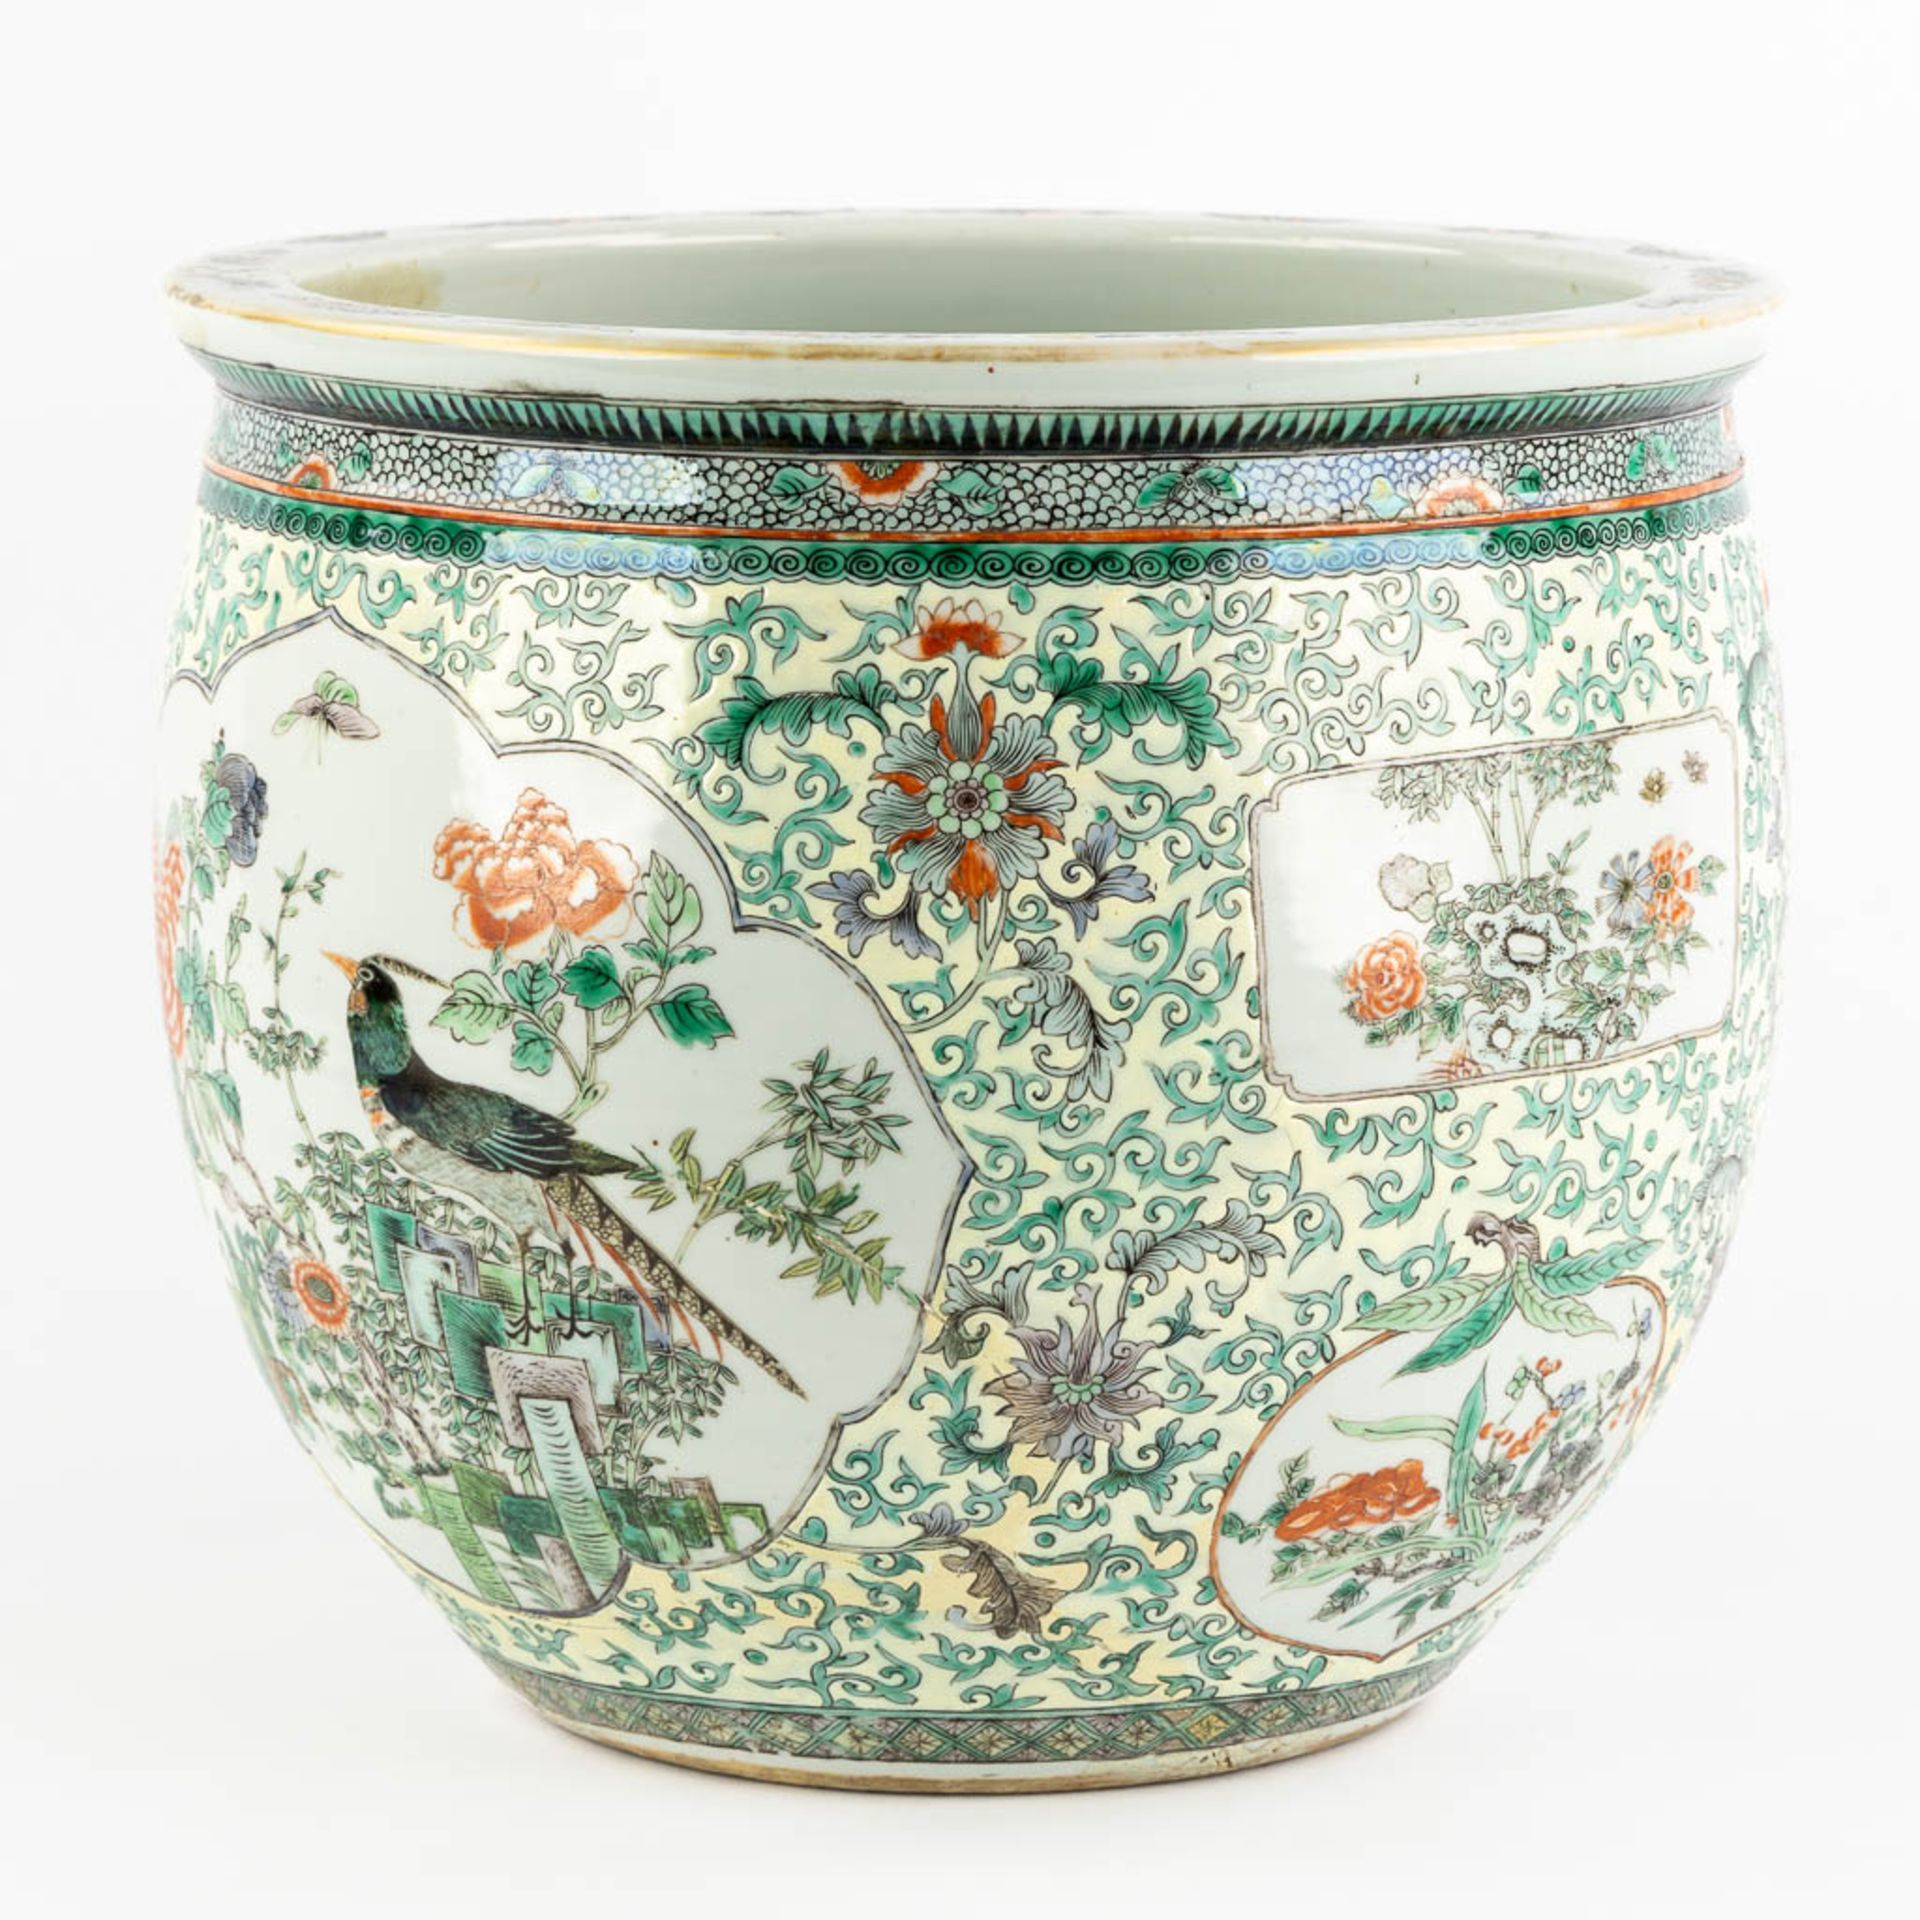 A Large Chinese Cache-Pot, Famille Verte decorated with fauna and flora. 19th C. (H:35 x D:40 cm) - Image 3 of 14